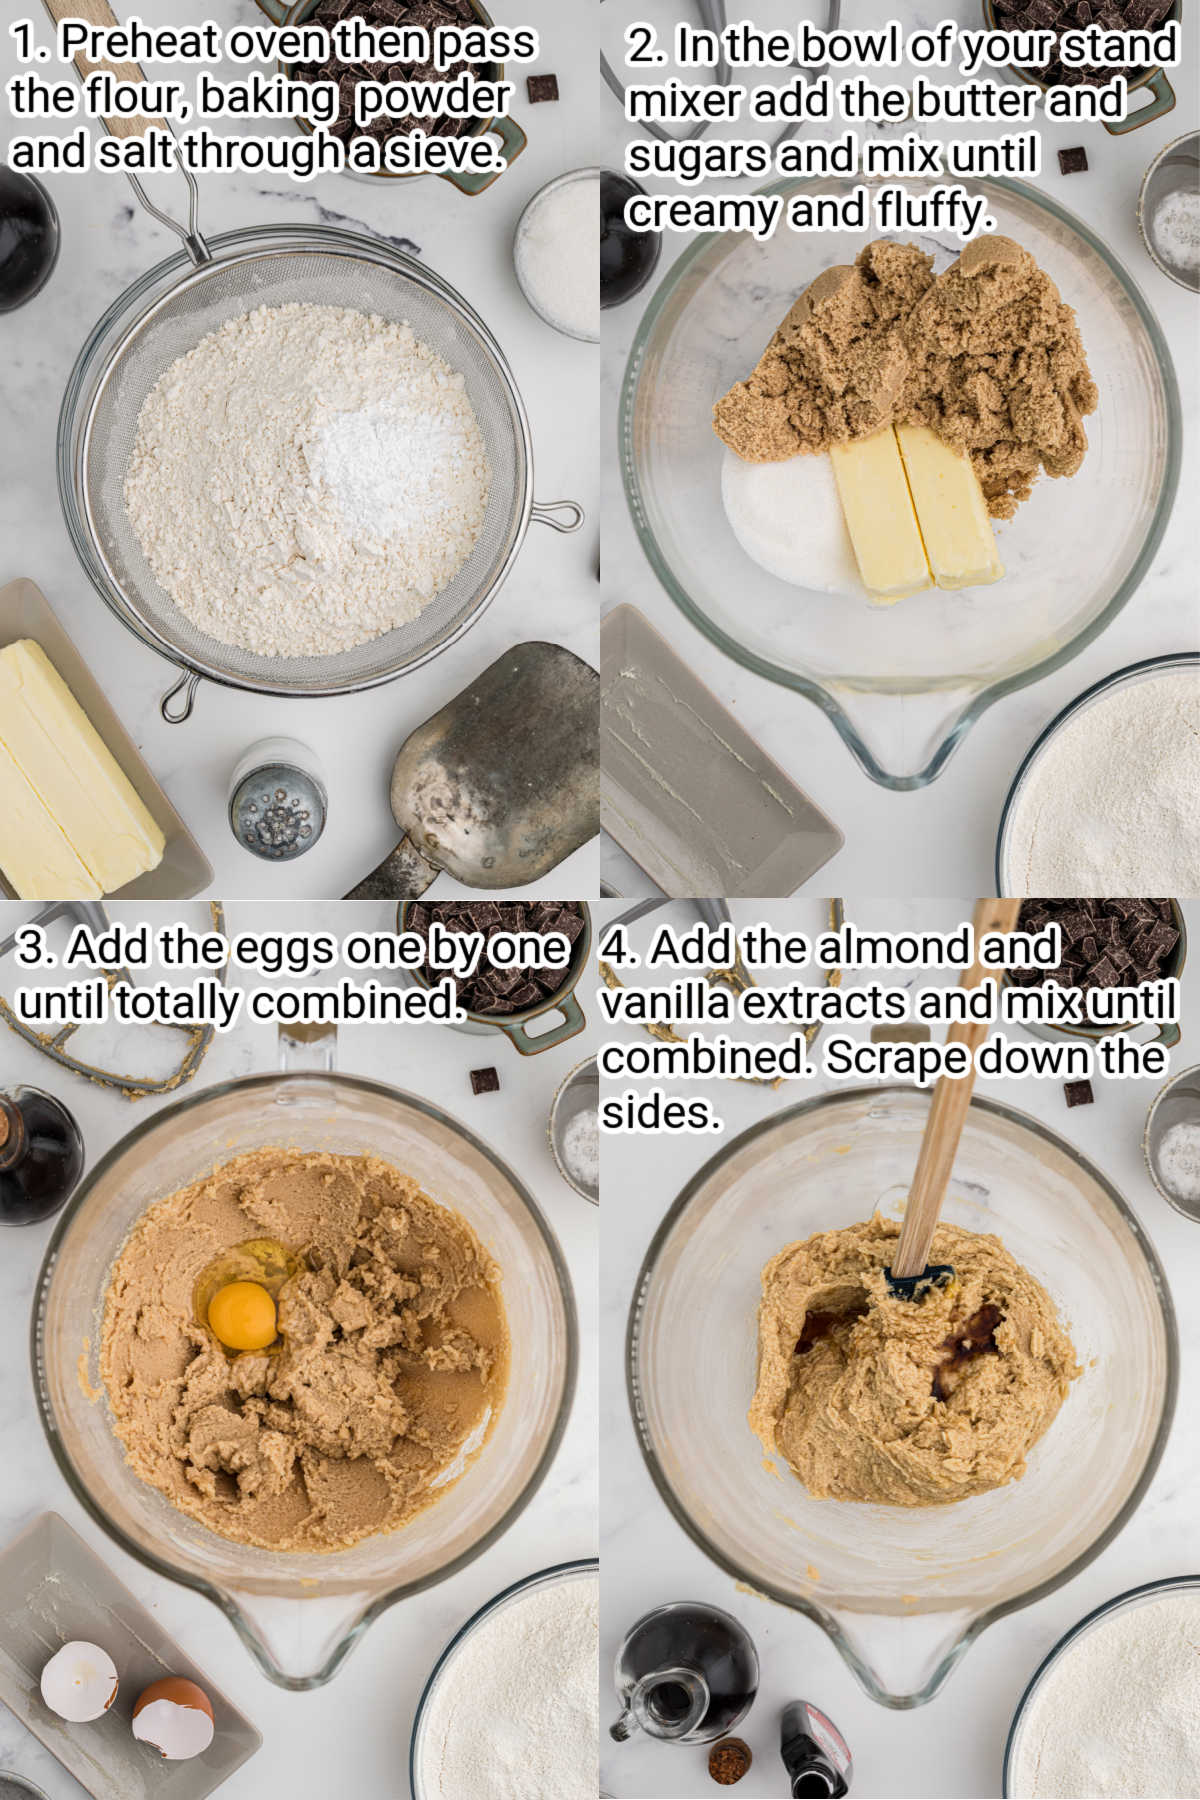 4 step by step images showing how to make thick chocolate chip cookies